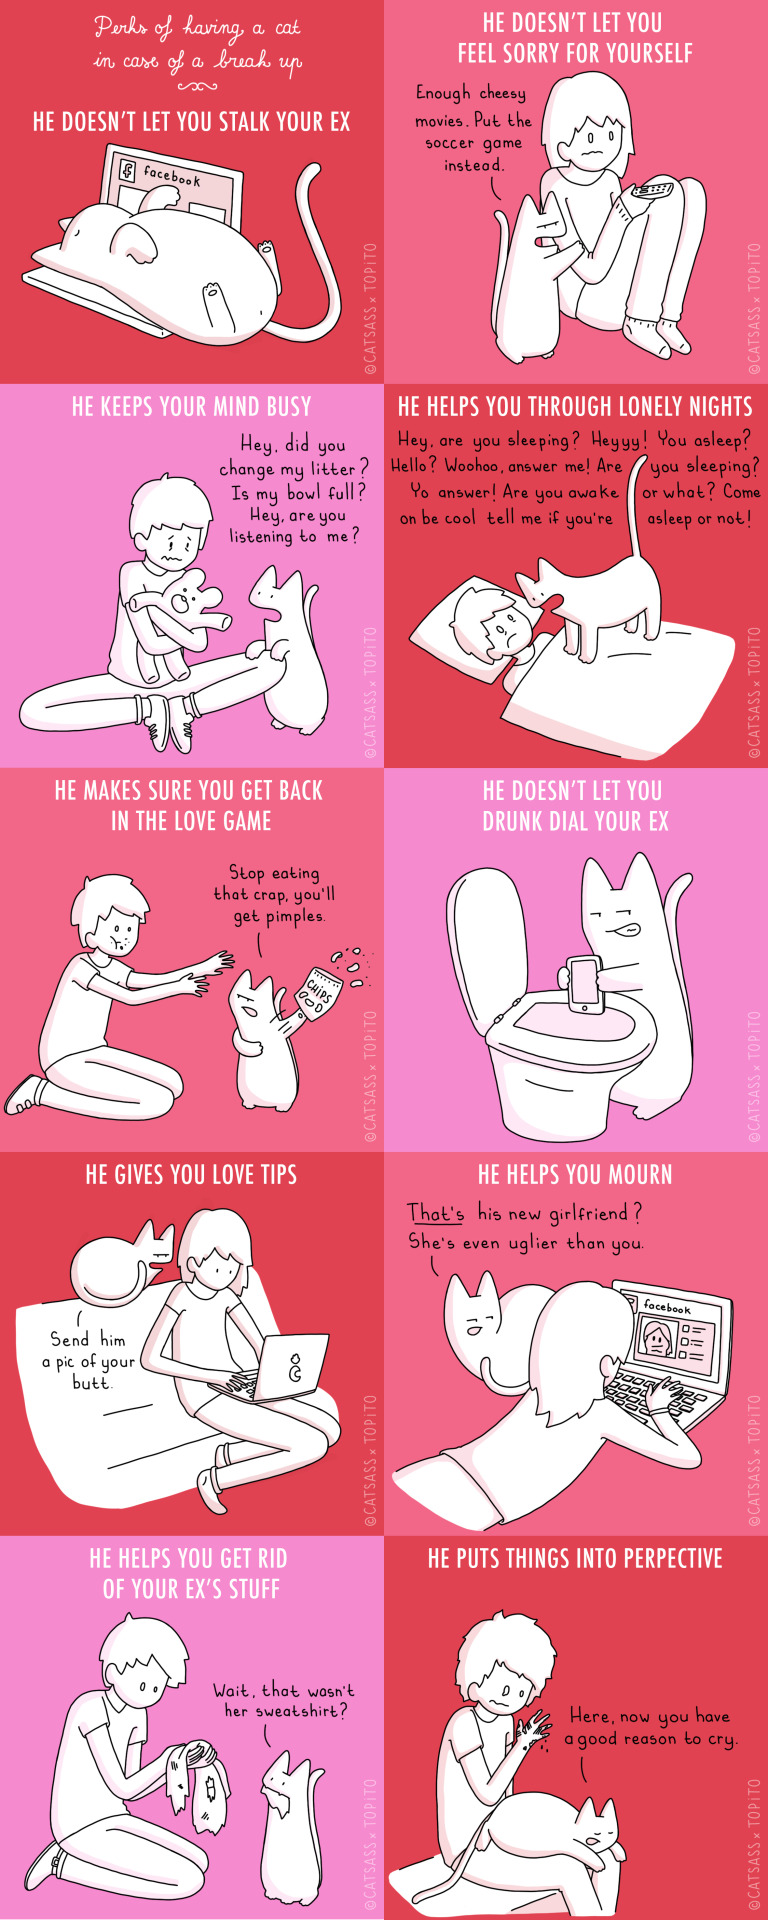 10 Benefits Of Having A Cat In Case Of A Break Up Made with @fuckyeahtopito